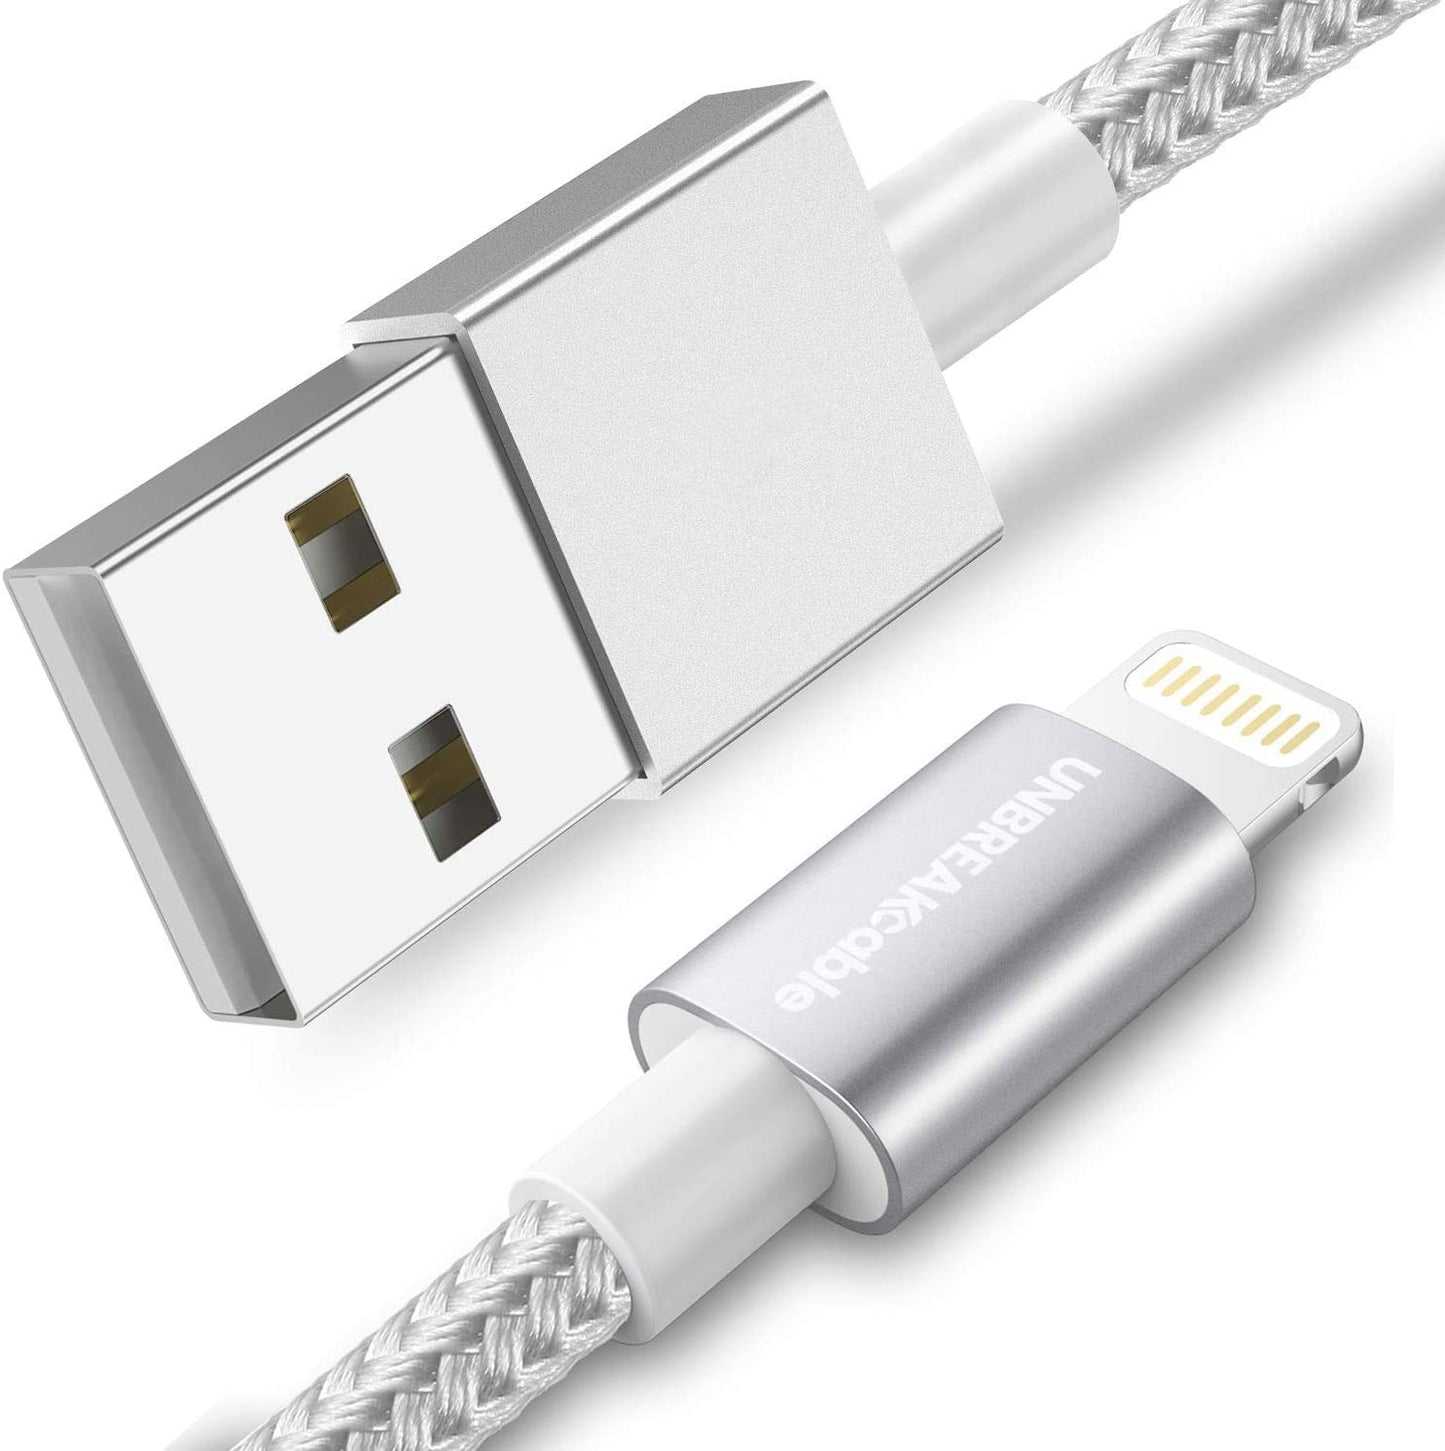 UNBREAKcable Lightning iPhone Charger Cable - [Apple MFi Certified] 3.3ft/1m Nylon Braided Apple Charger Lead USB Fast Charging Cable